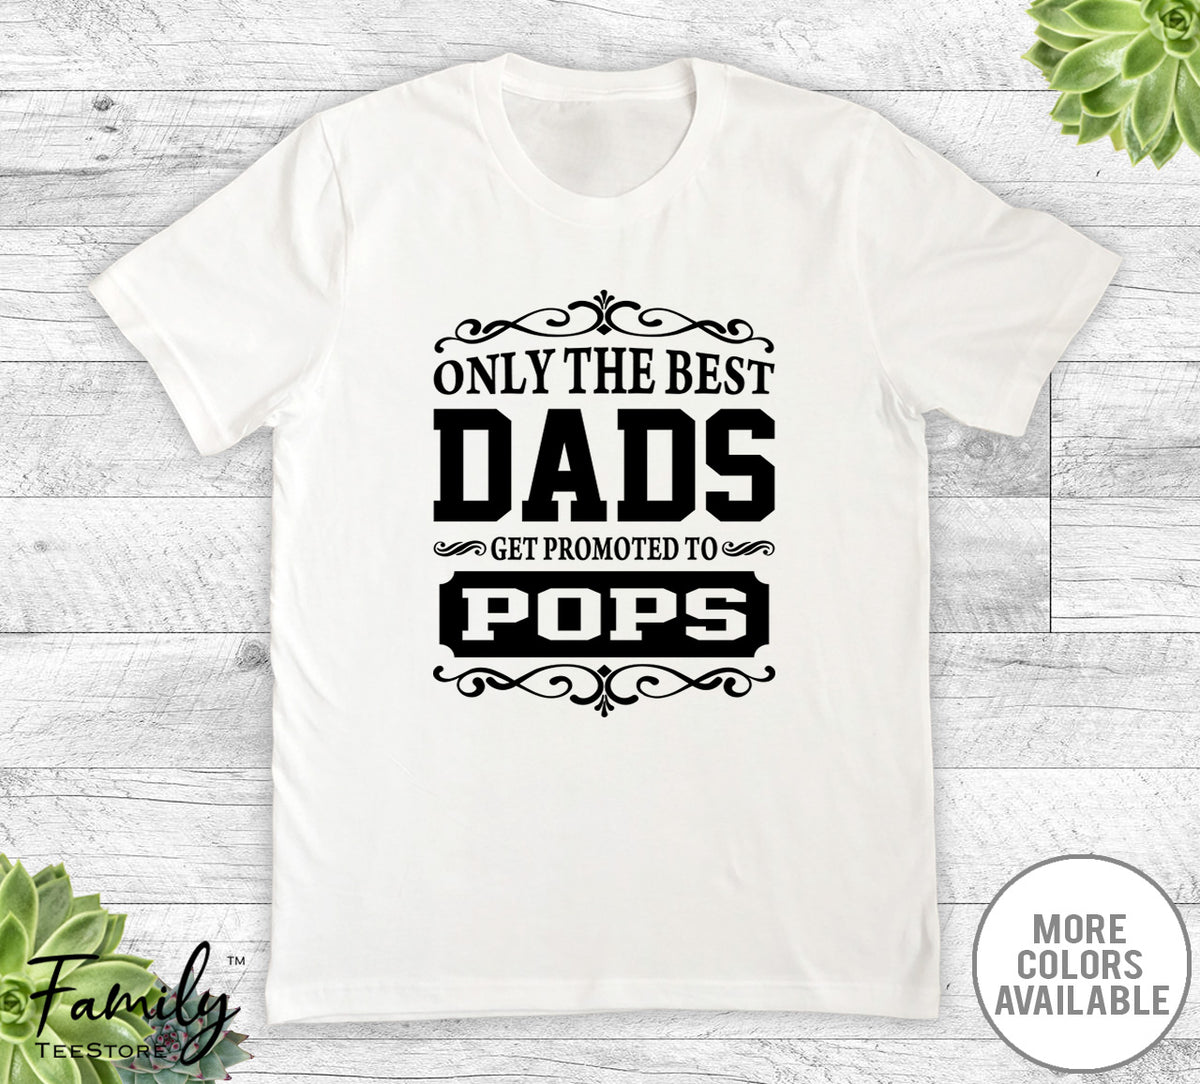 Only The Best Dads Get Promoted To Pops - Unisex T-shirt - Pops Shirt - Pops Gift